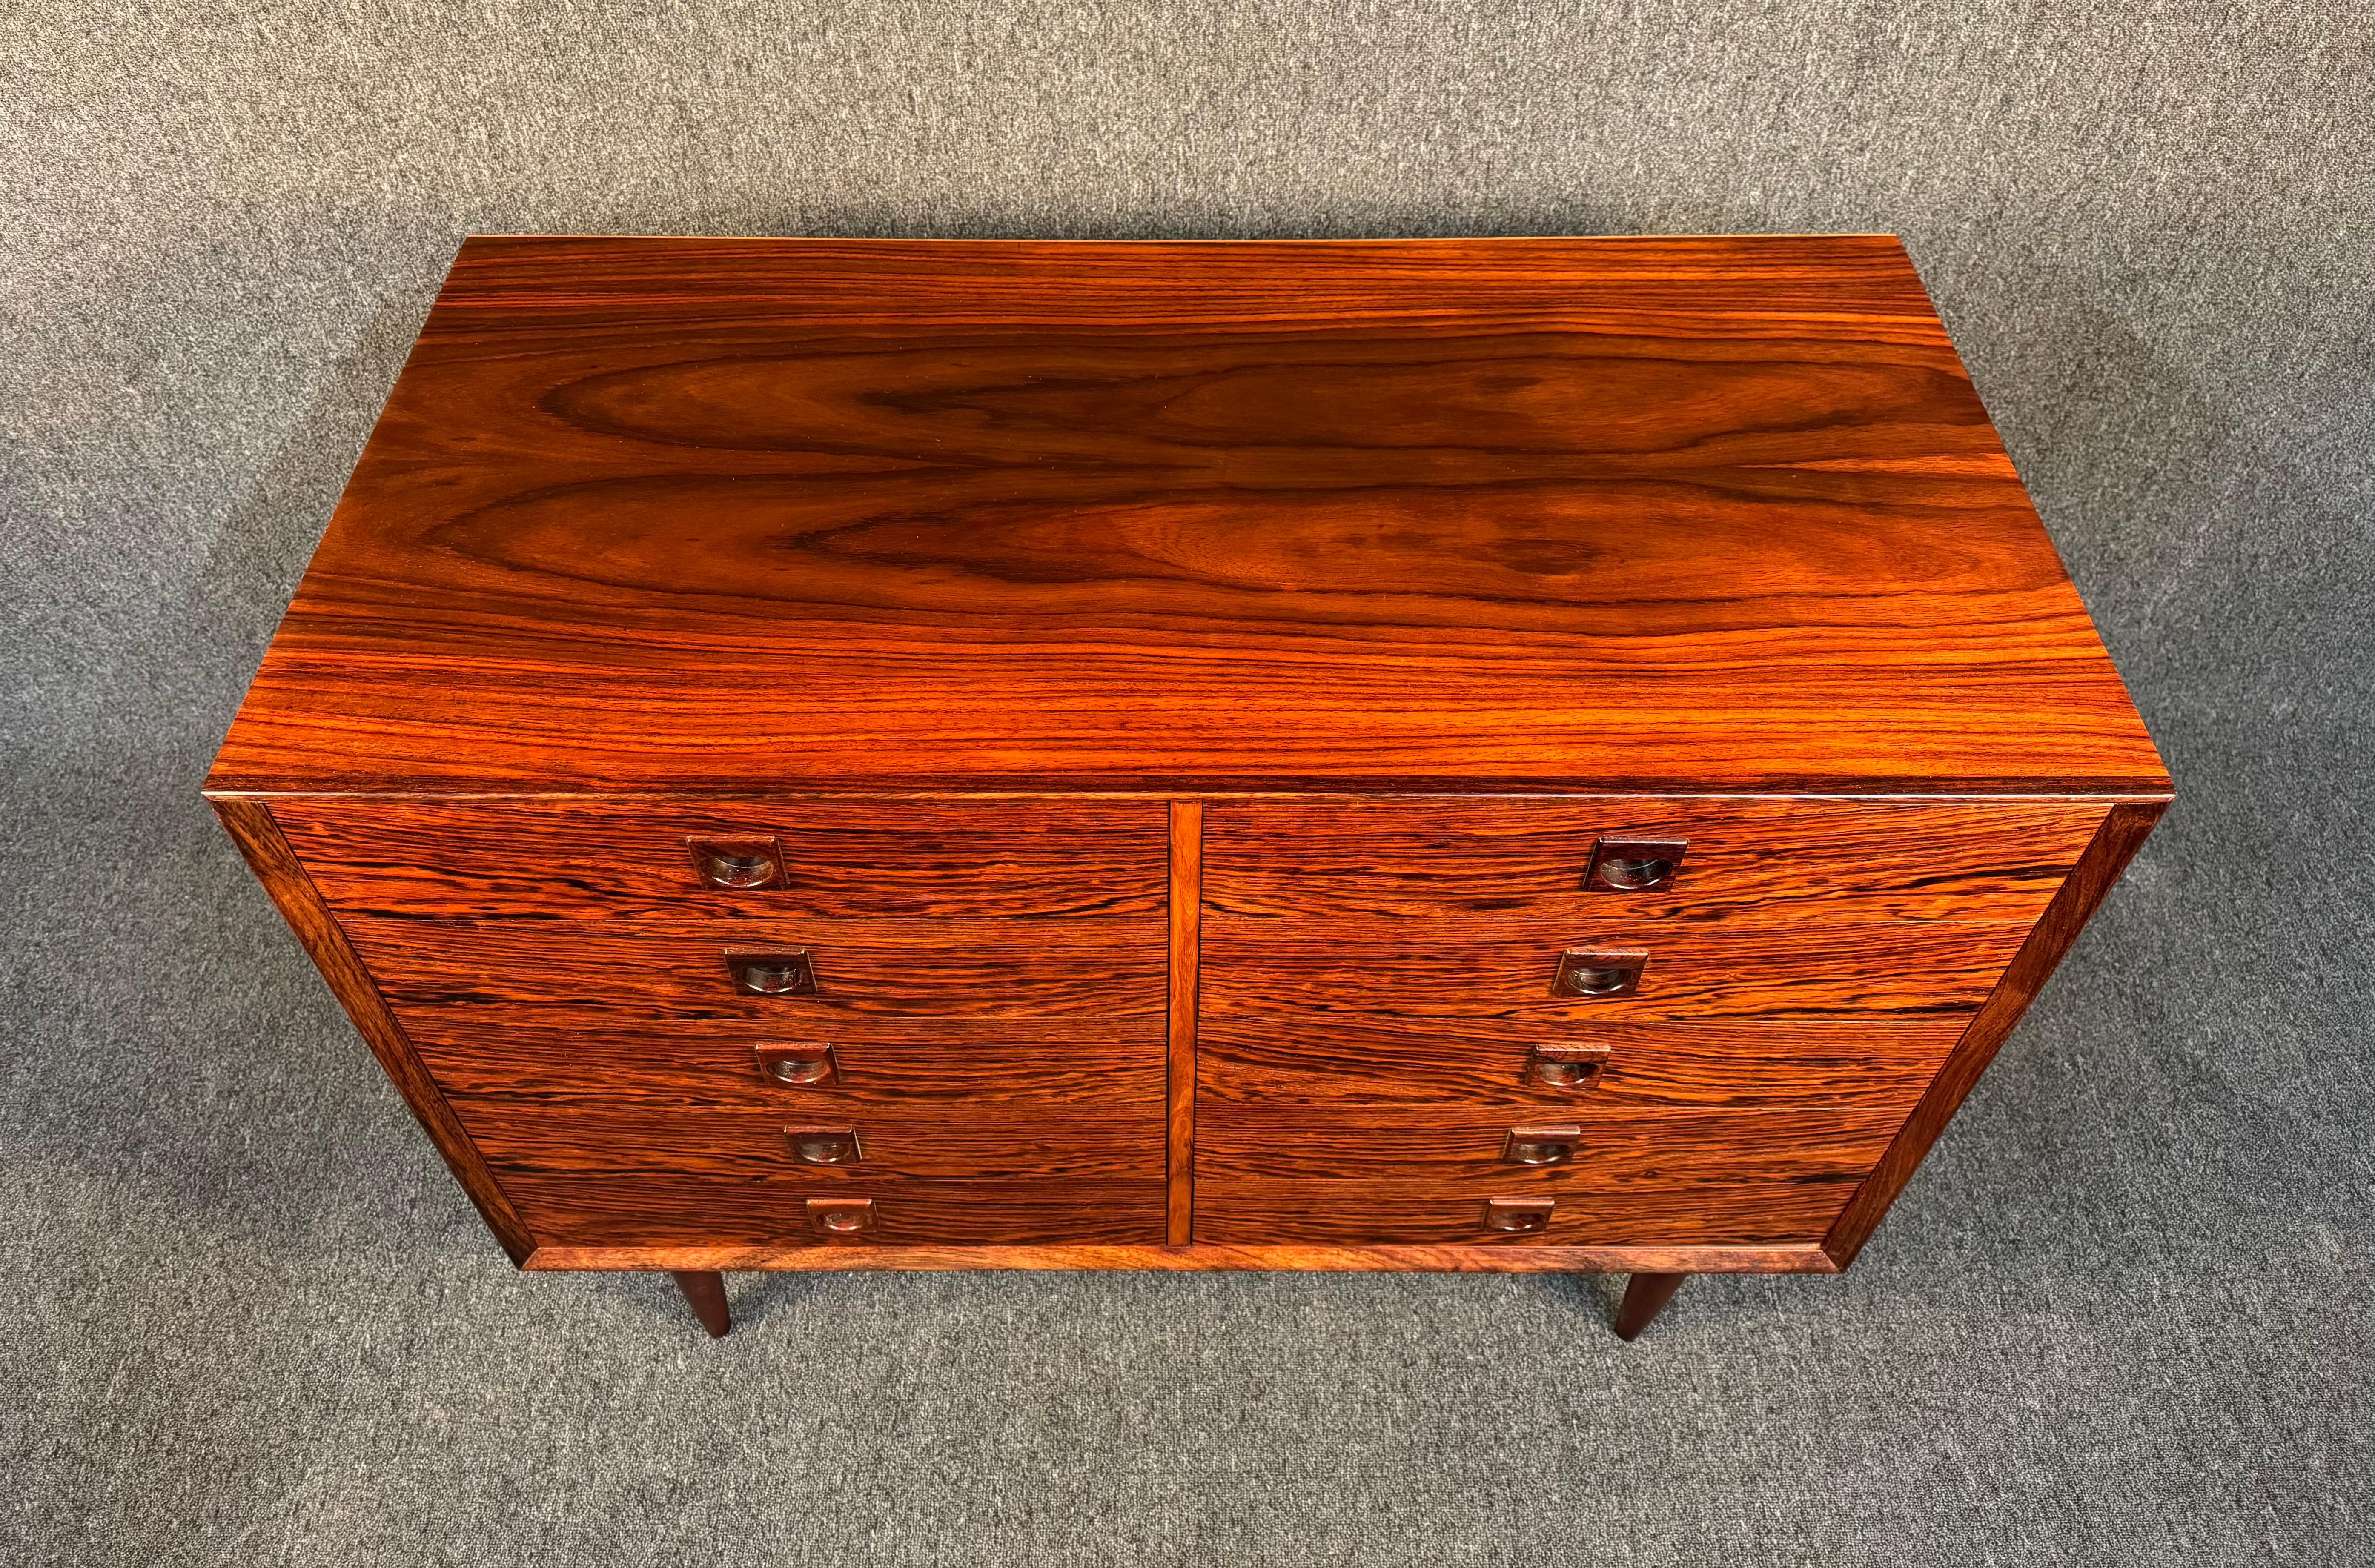 Here is a beautiful Scandinavian modern dresser in rosewood manufactured in Denmark in the 1960's by Brouer Mobelfabrik.
This lovely piece, recently imported from Europe to California before its refinishing, features a lively wood grain showing lots